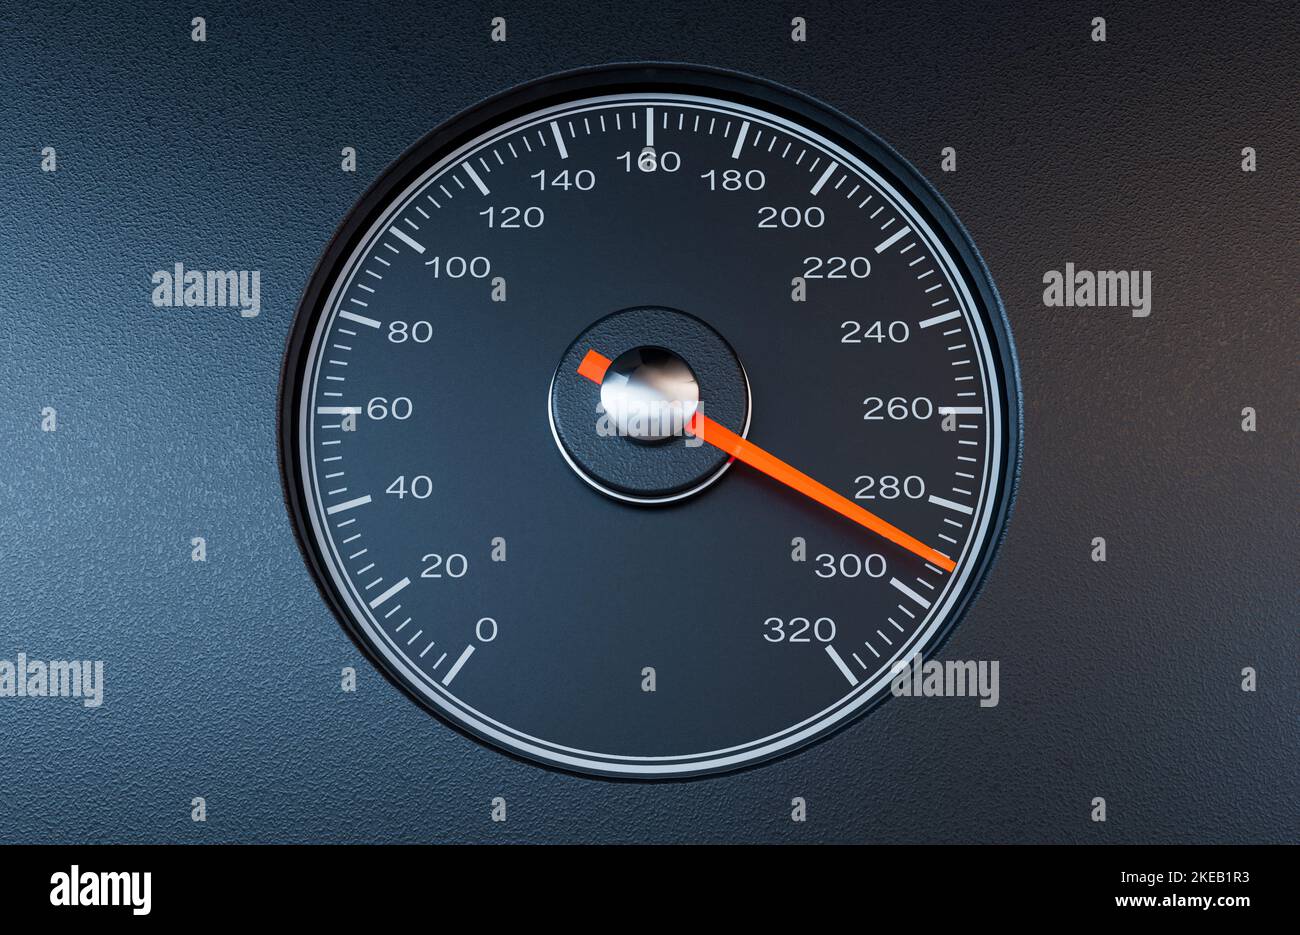 A regular car speedometer with an orange needle pointing towards a high speed on an isolated black background - 3D render Stock Photo